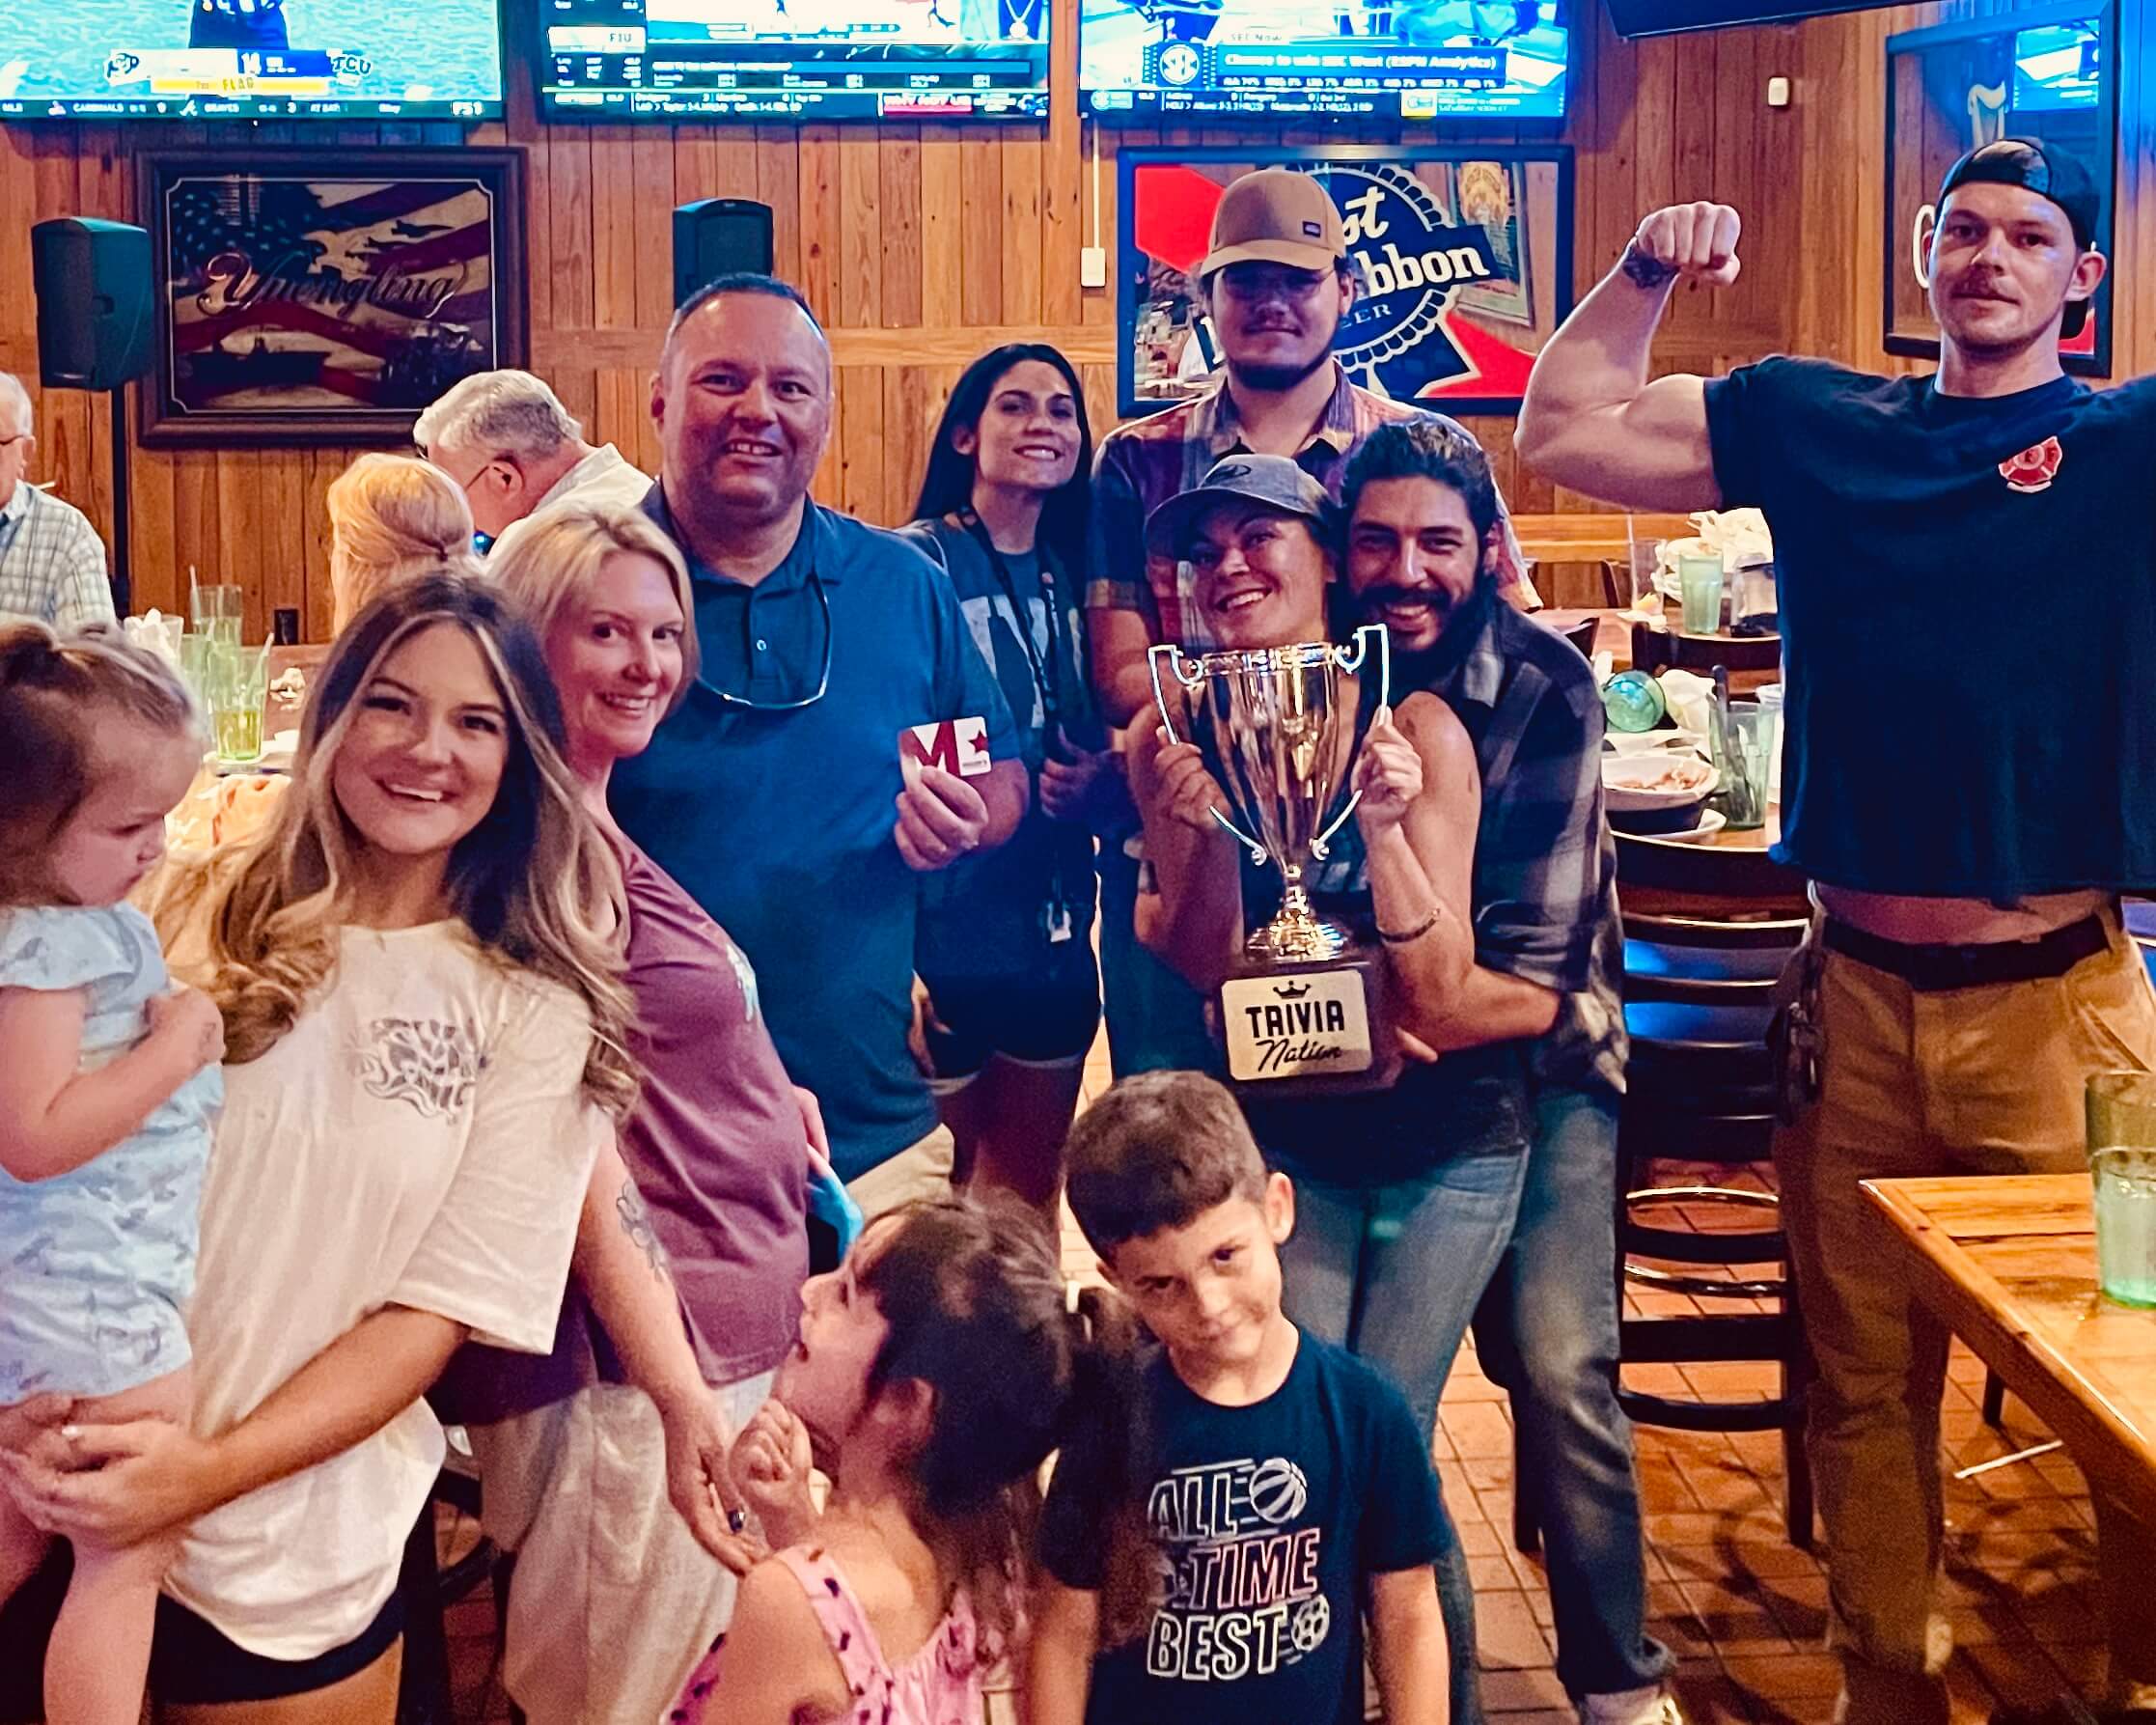 Miller's Ale House Orange Park FL 32073 trivia night: group of adults and family gathered together smiling with kids in the front and a man making a strong arm gesture in the back